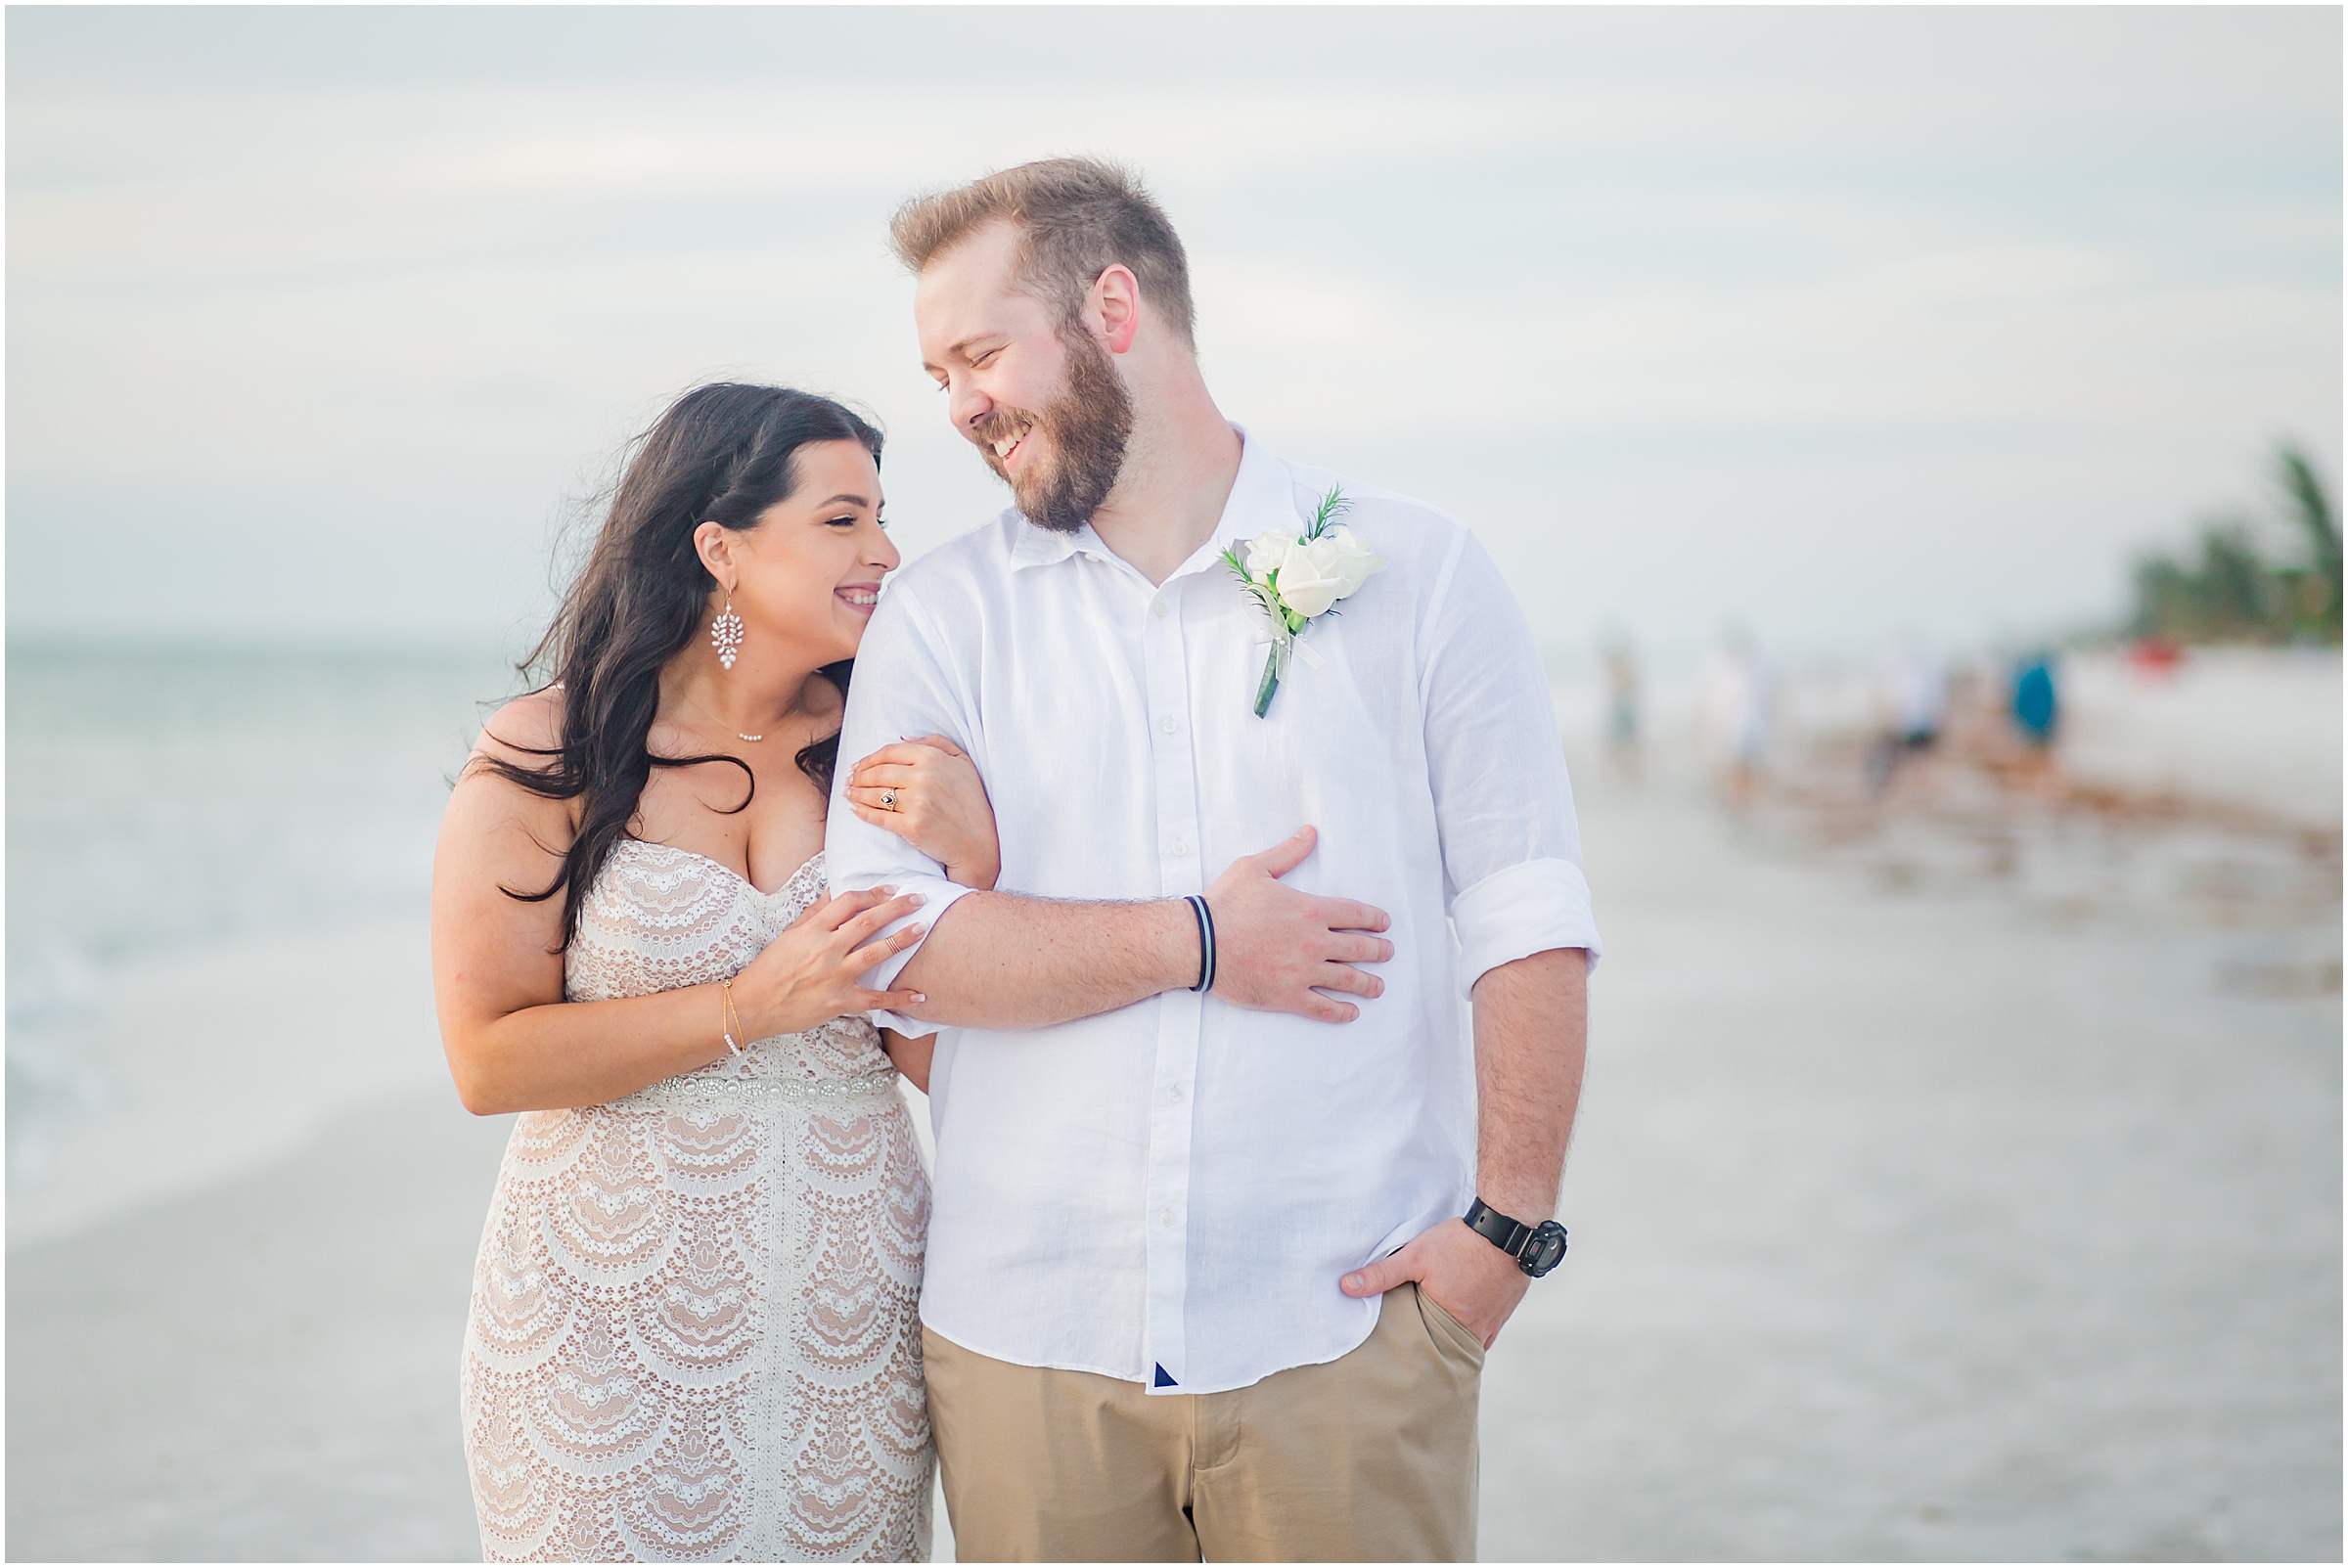 Marci & Justin Hobart tied the knot at their April Destination Beach Wedding in Indian Rocks, FL.